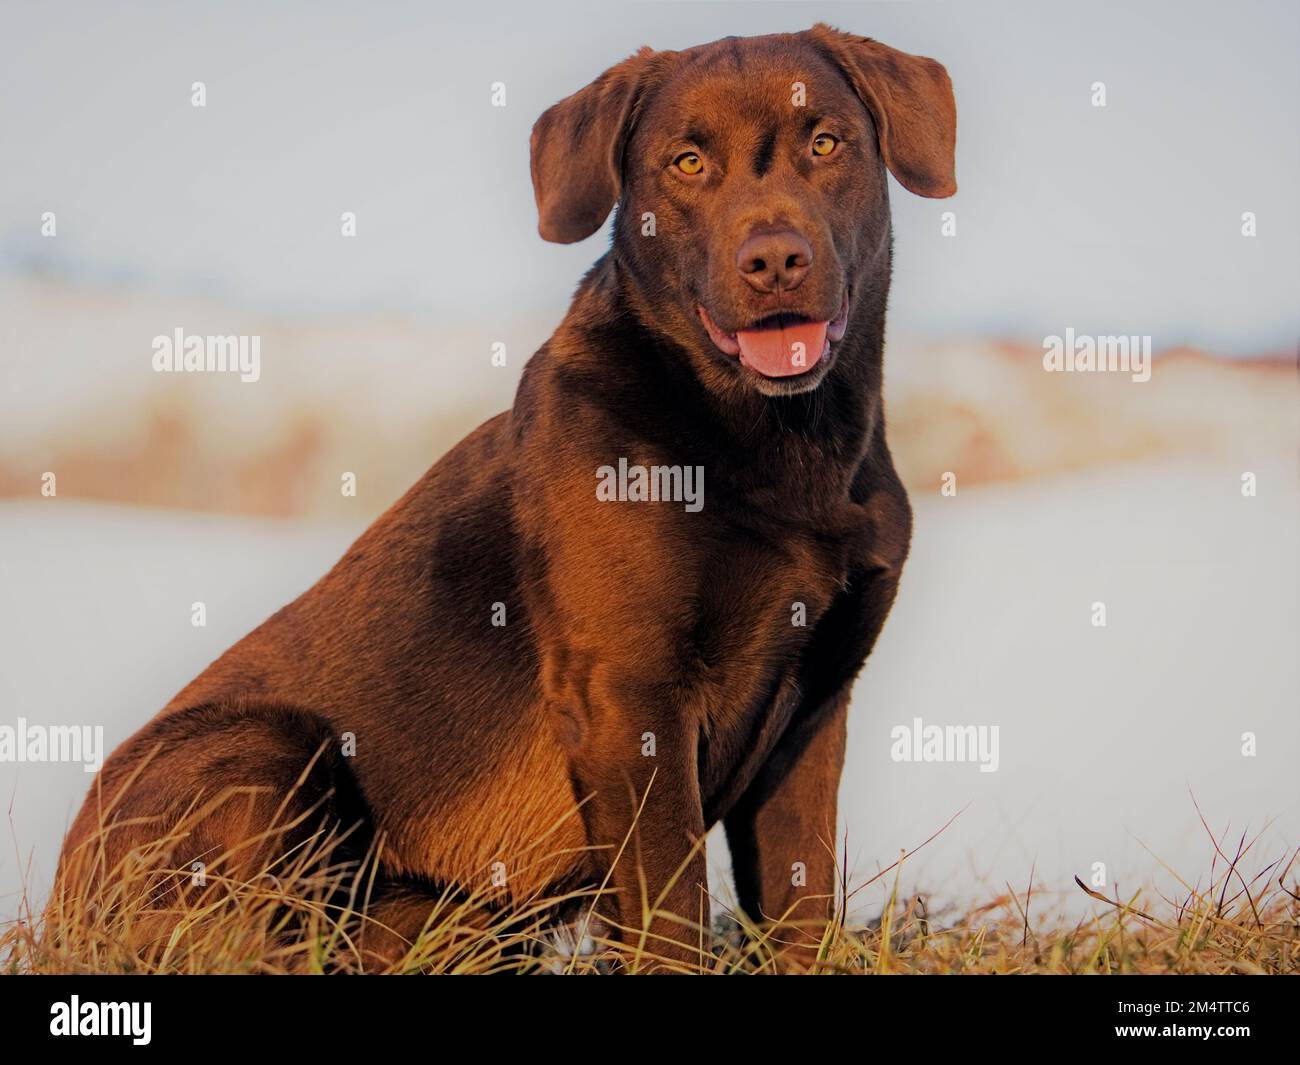 Chocolate Labrador Retriever portrait, sitting on grass in meadow, late winter, gray fogy snowy background. Stock Photo